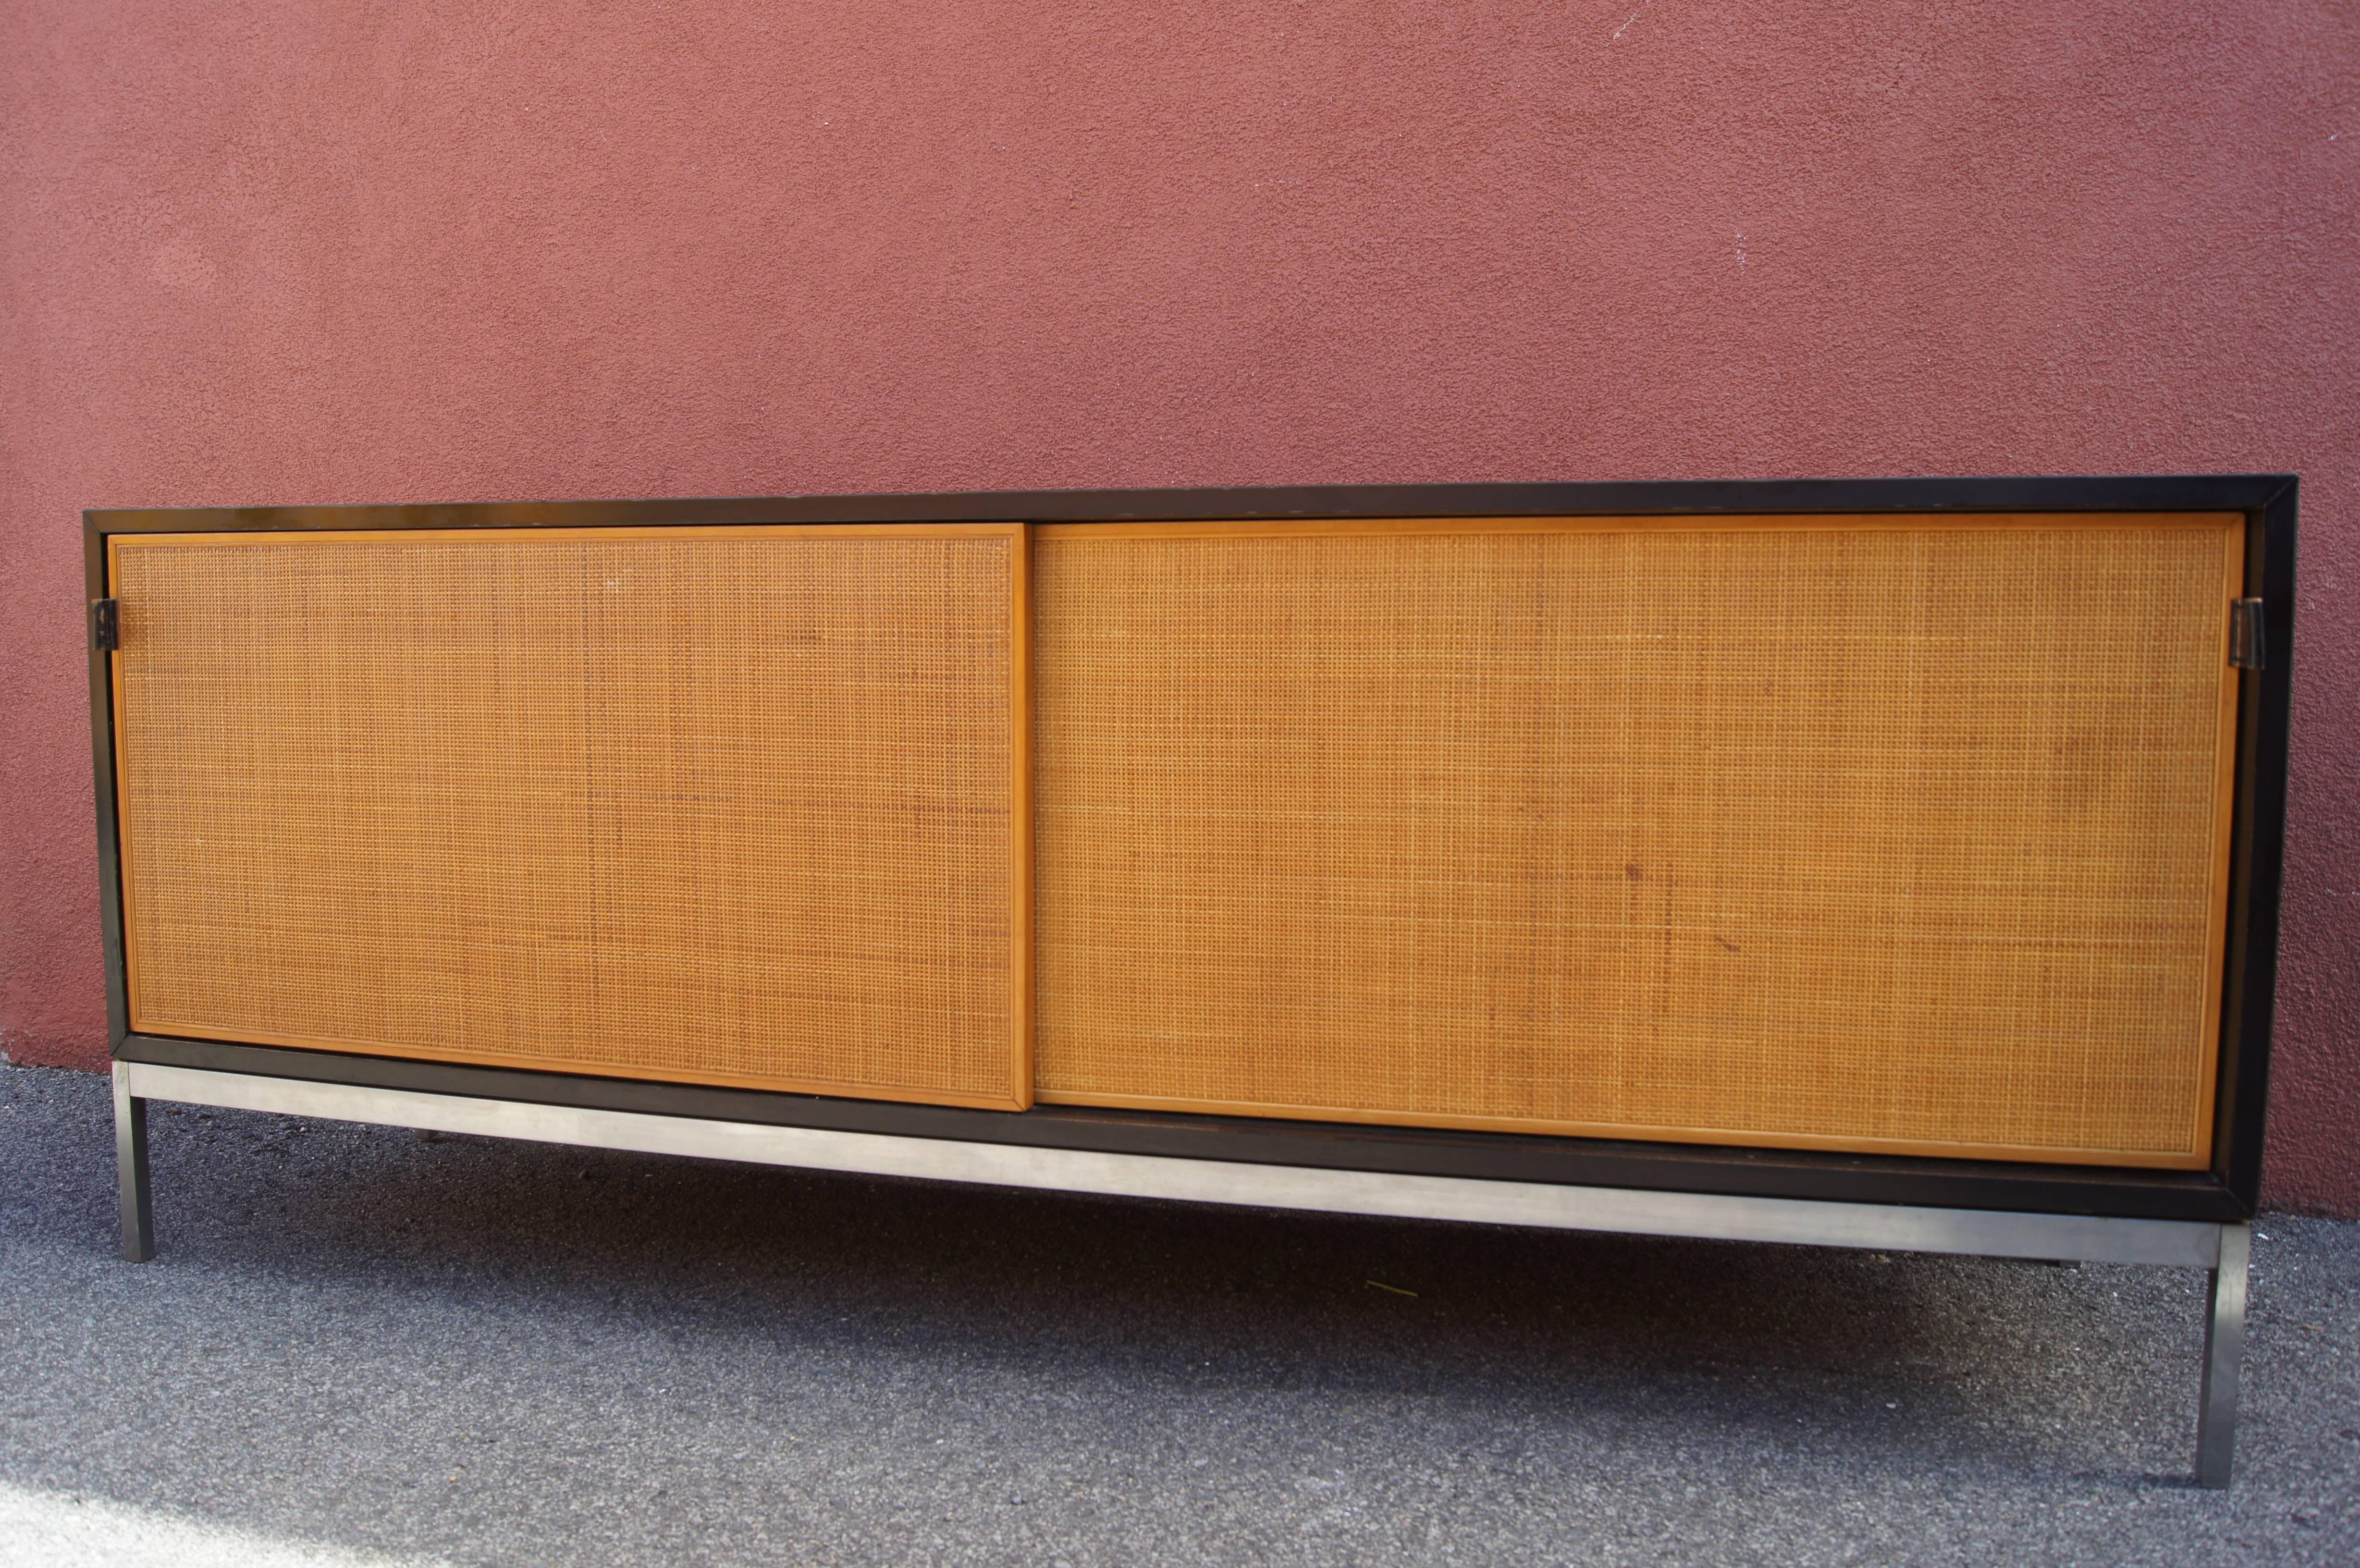 This sideboard exemplifies Florence Knoll's classic clean-lined aesthetic. The black laminate case sits on a steel base and features handsome cane sliding doors with leather pulls. Inside are four tray drawers, one filing drawer, and adjustable